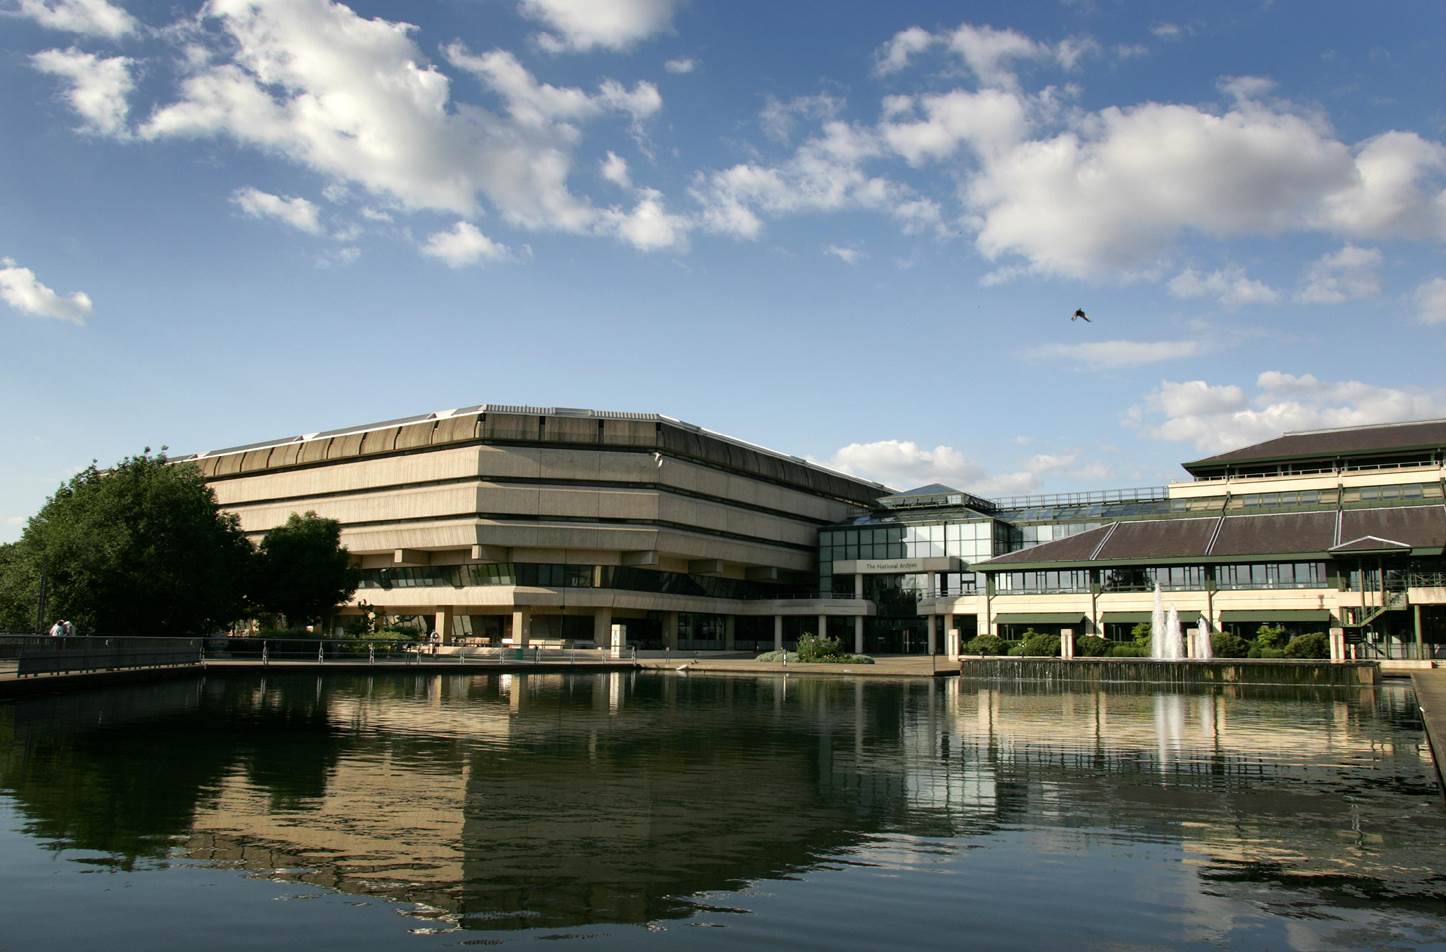 The National Archives building